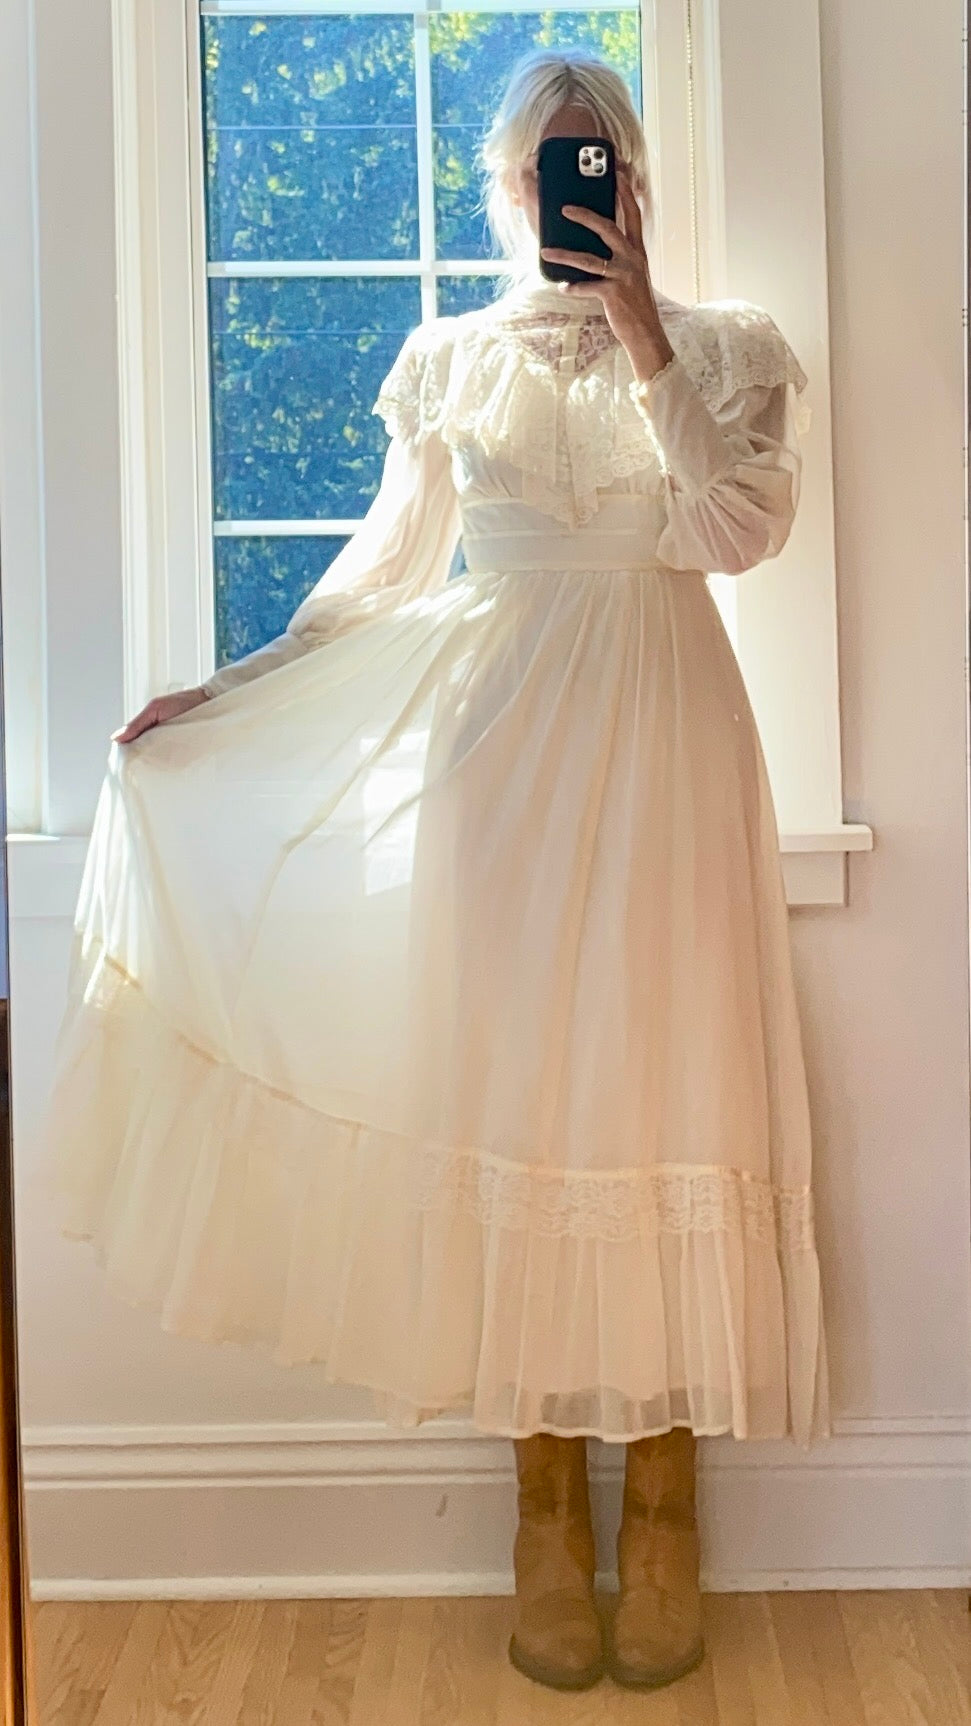 VINTAGE Candy Jones of California Cream Voile and lace Victoriana Dress S